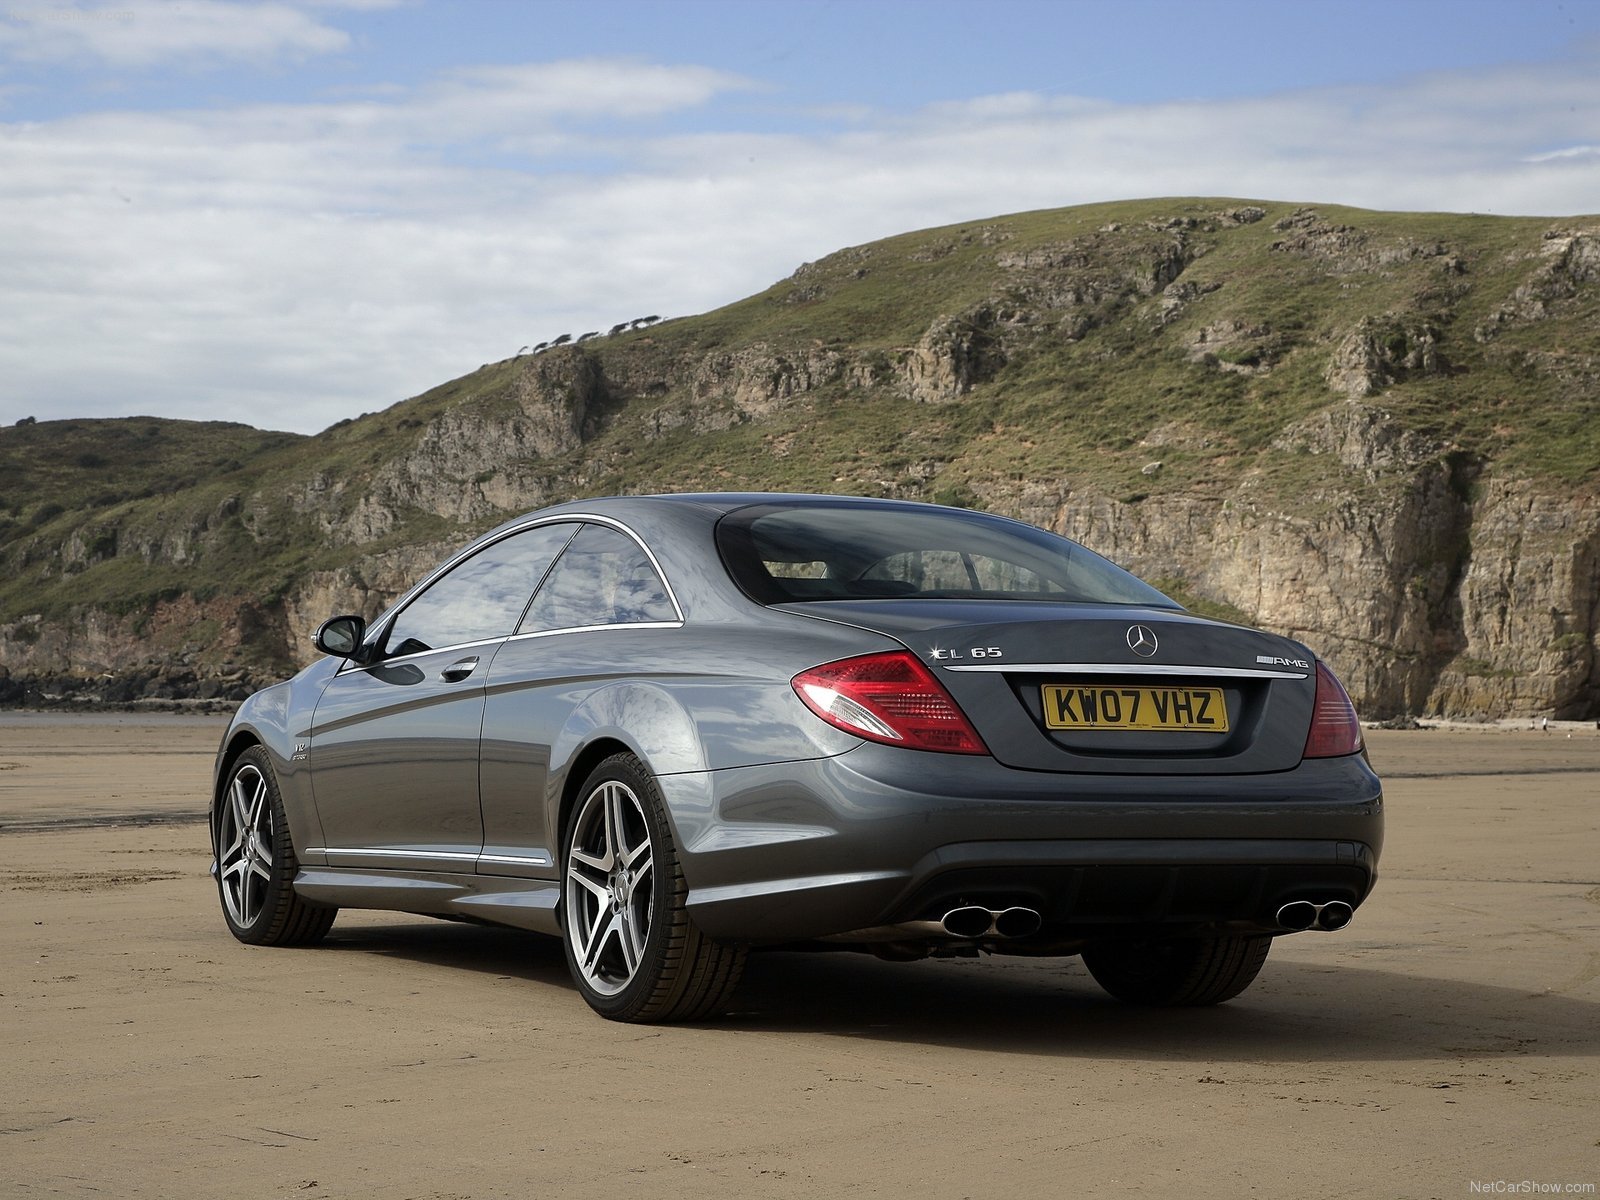 mercedes benz, Cl65, Amg, Uk version, Cars, Coupe, 2008 Wallpaper